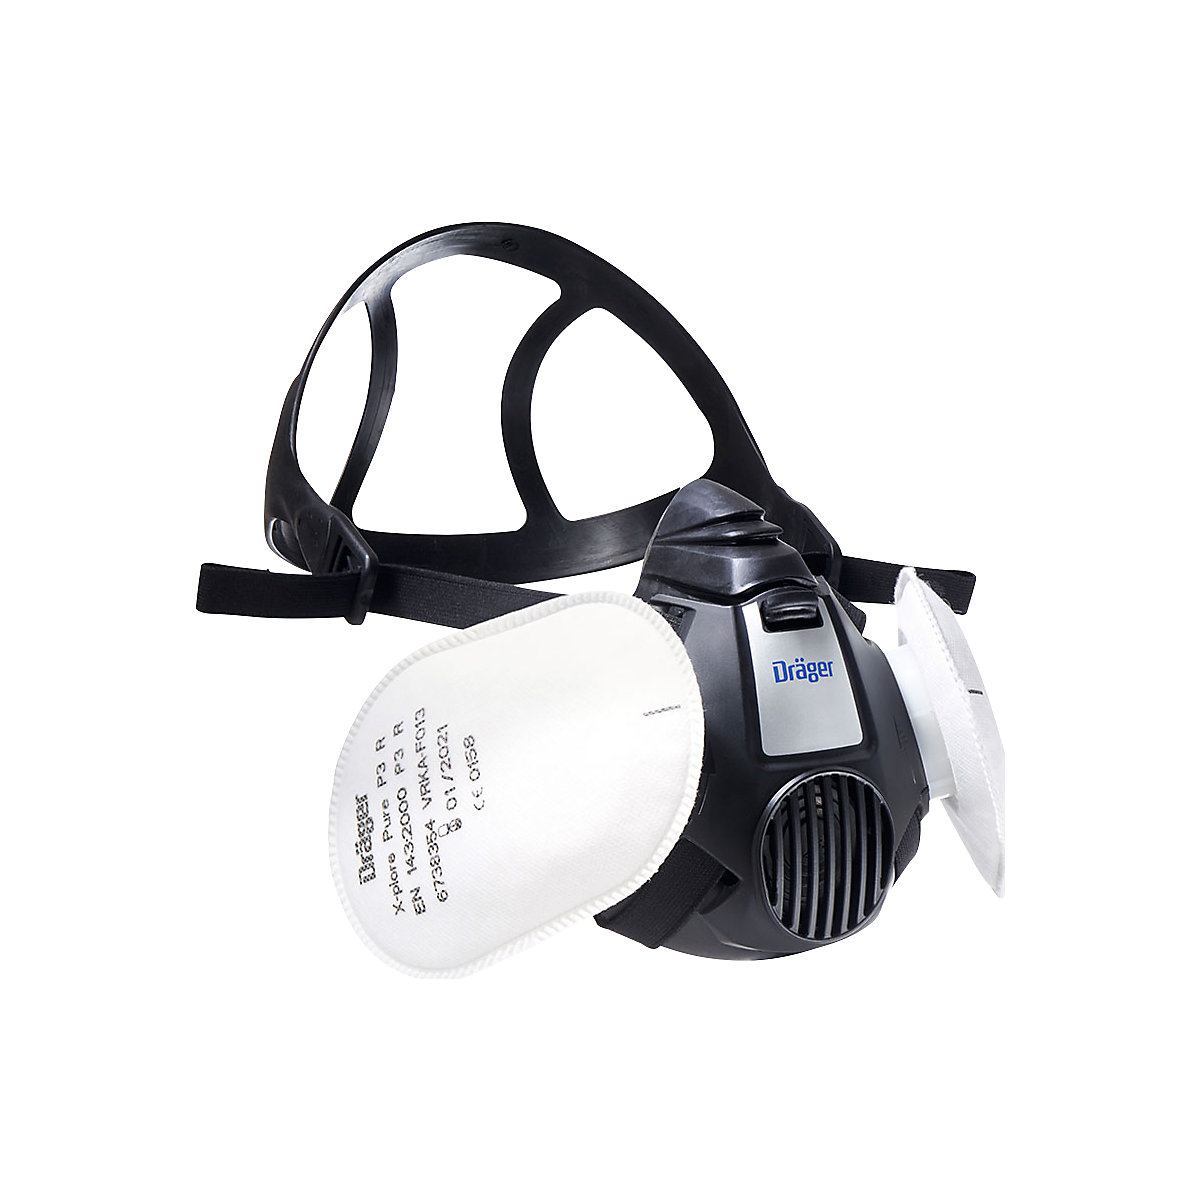 Set of X-plore® 3500 half masks for working with dust - Dräger